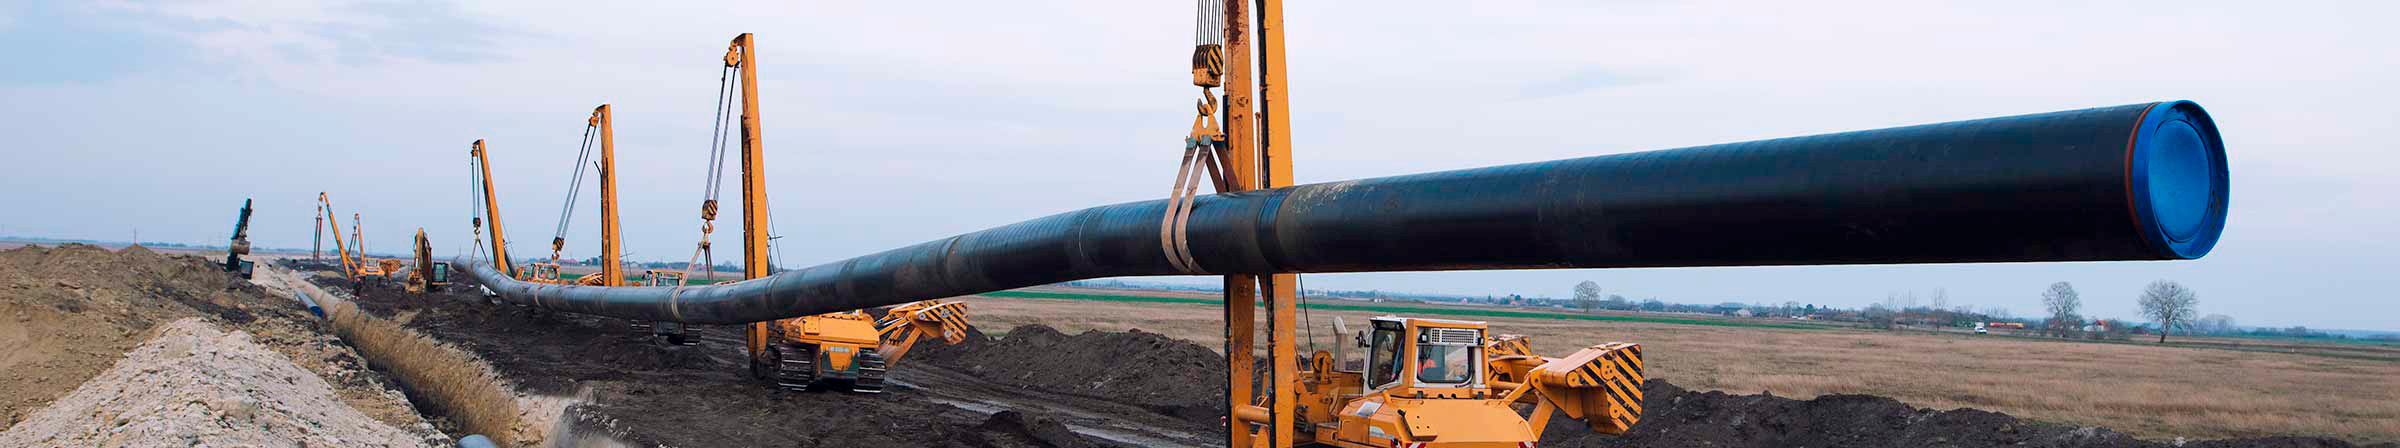 Gas Pipe in Ground